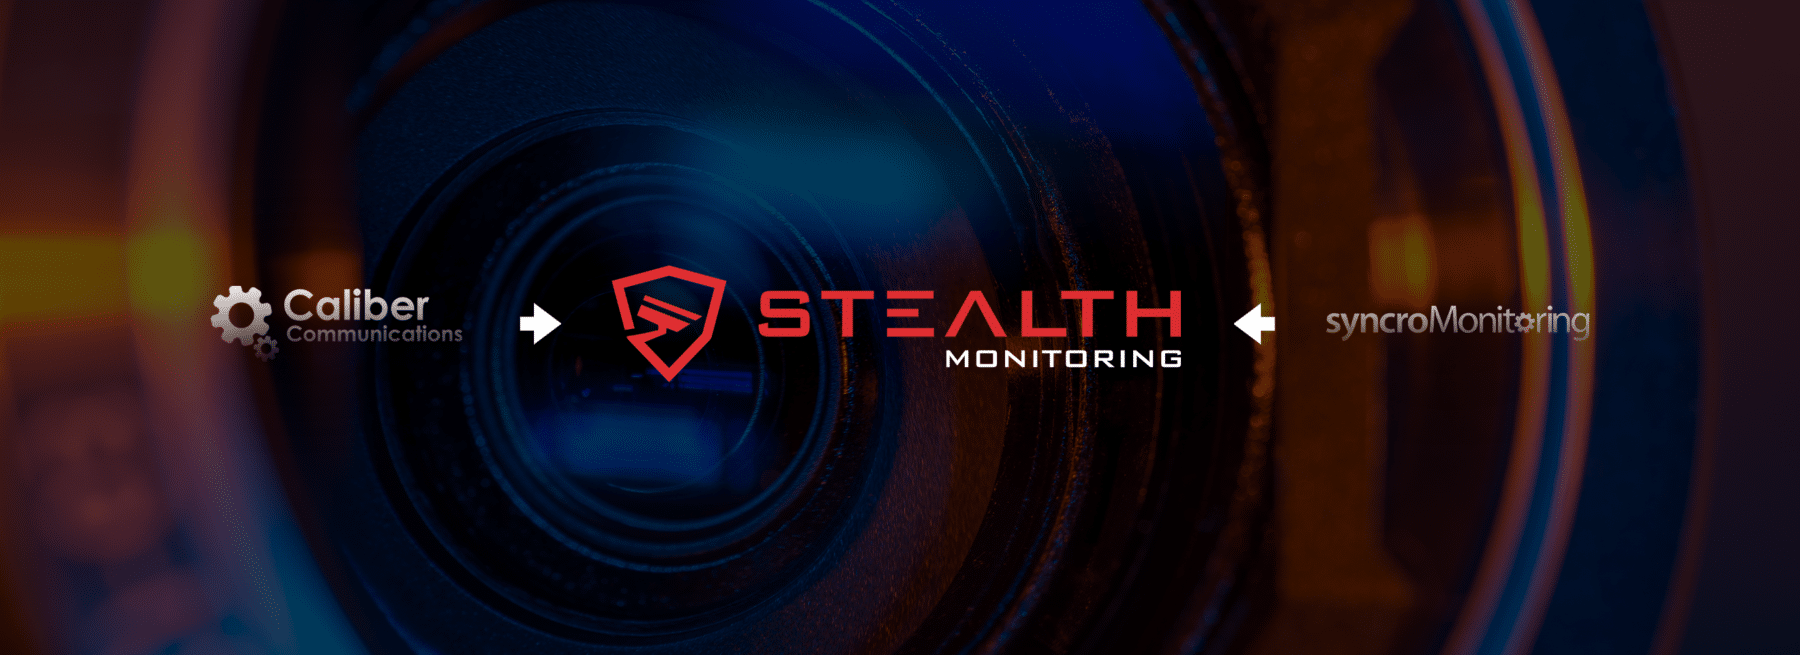 Caliber Communications joins Stealth Monitoring